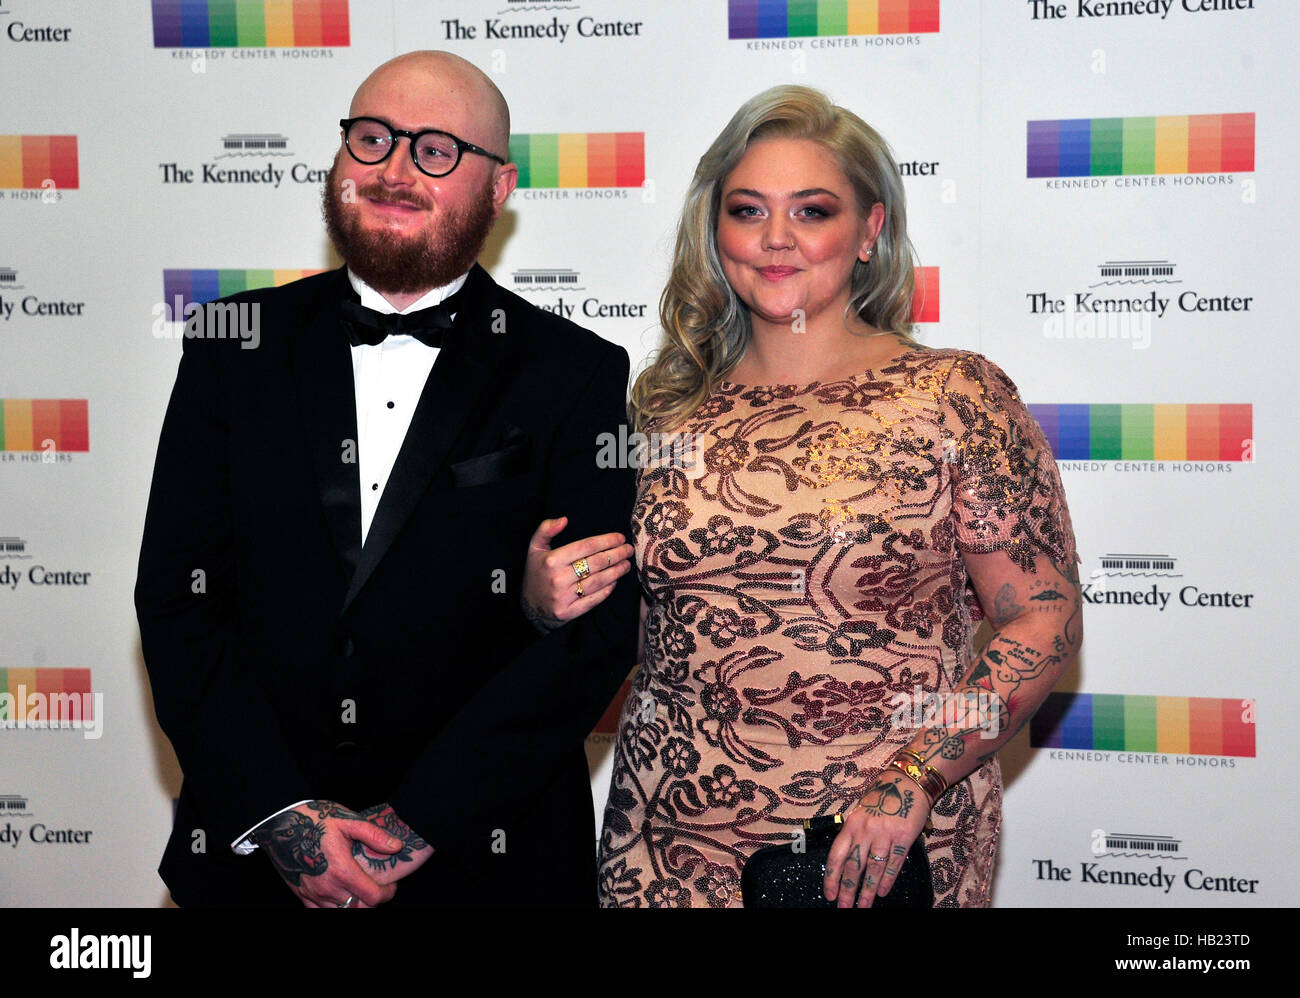 Washington DC, USA. 3rd Dec, 2016. Singer Elle King and fiance Andrew Ferguson arrive for the formal Artist's Dinner honoring the recipients of the 39th Annual Kennedy Center Honors hosted by United States Secretary of State John F. Kerry at the U.S. Department of State in Washington, DC on Saturday, December 3, 2016. The 2016 honorees are: Argentine pianist Martha Argerich; rock band the Eagles; screen and stage actor Al Pacino; gospel and blues singer Mavis Staples; and musician James Taylor. Credit:  MediaPunch Inc/Alamy Live News Stock Photo